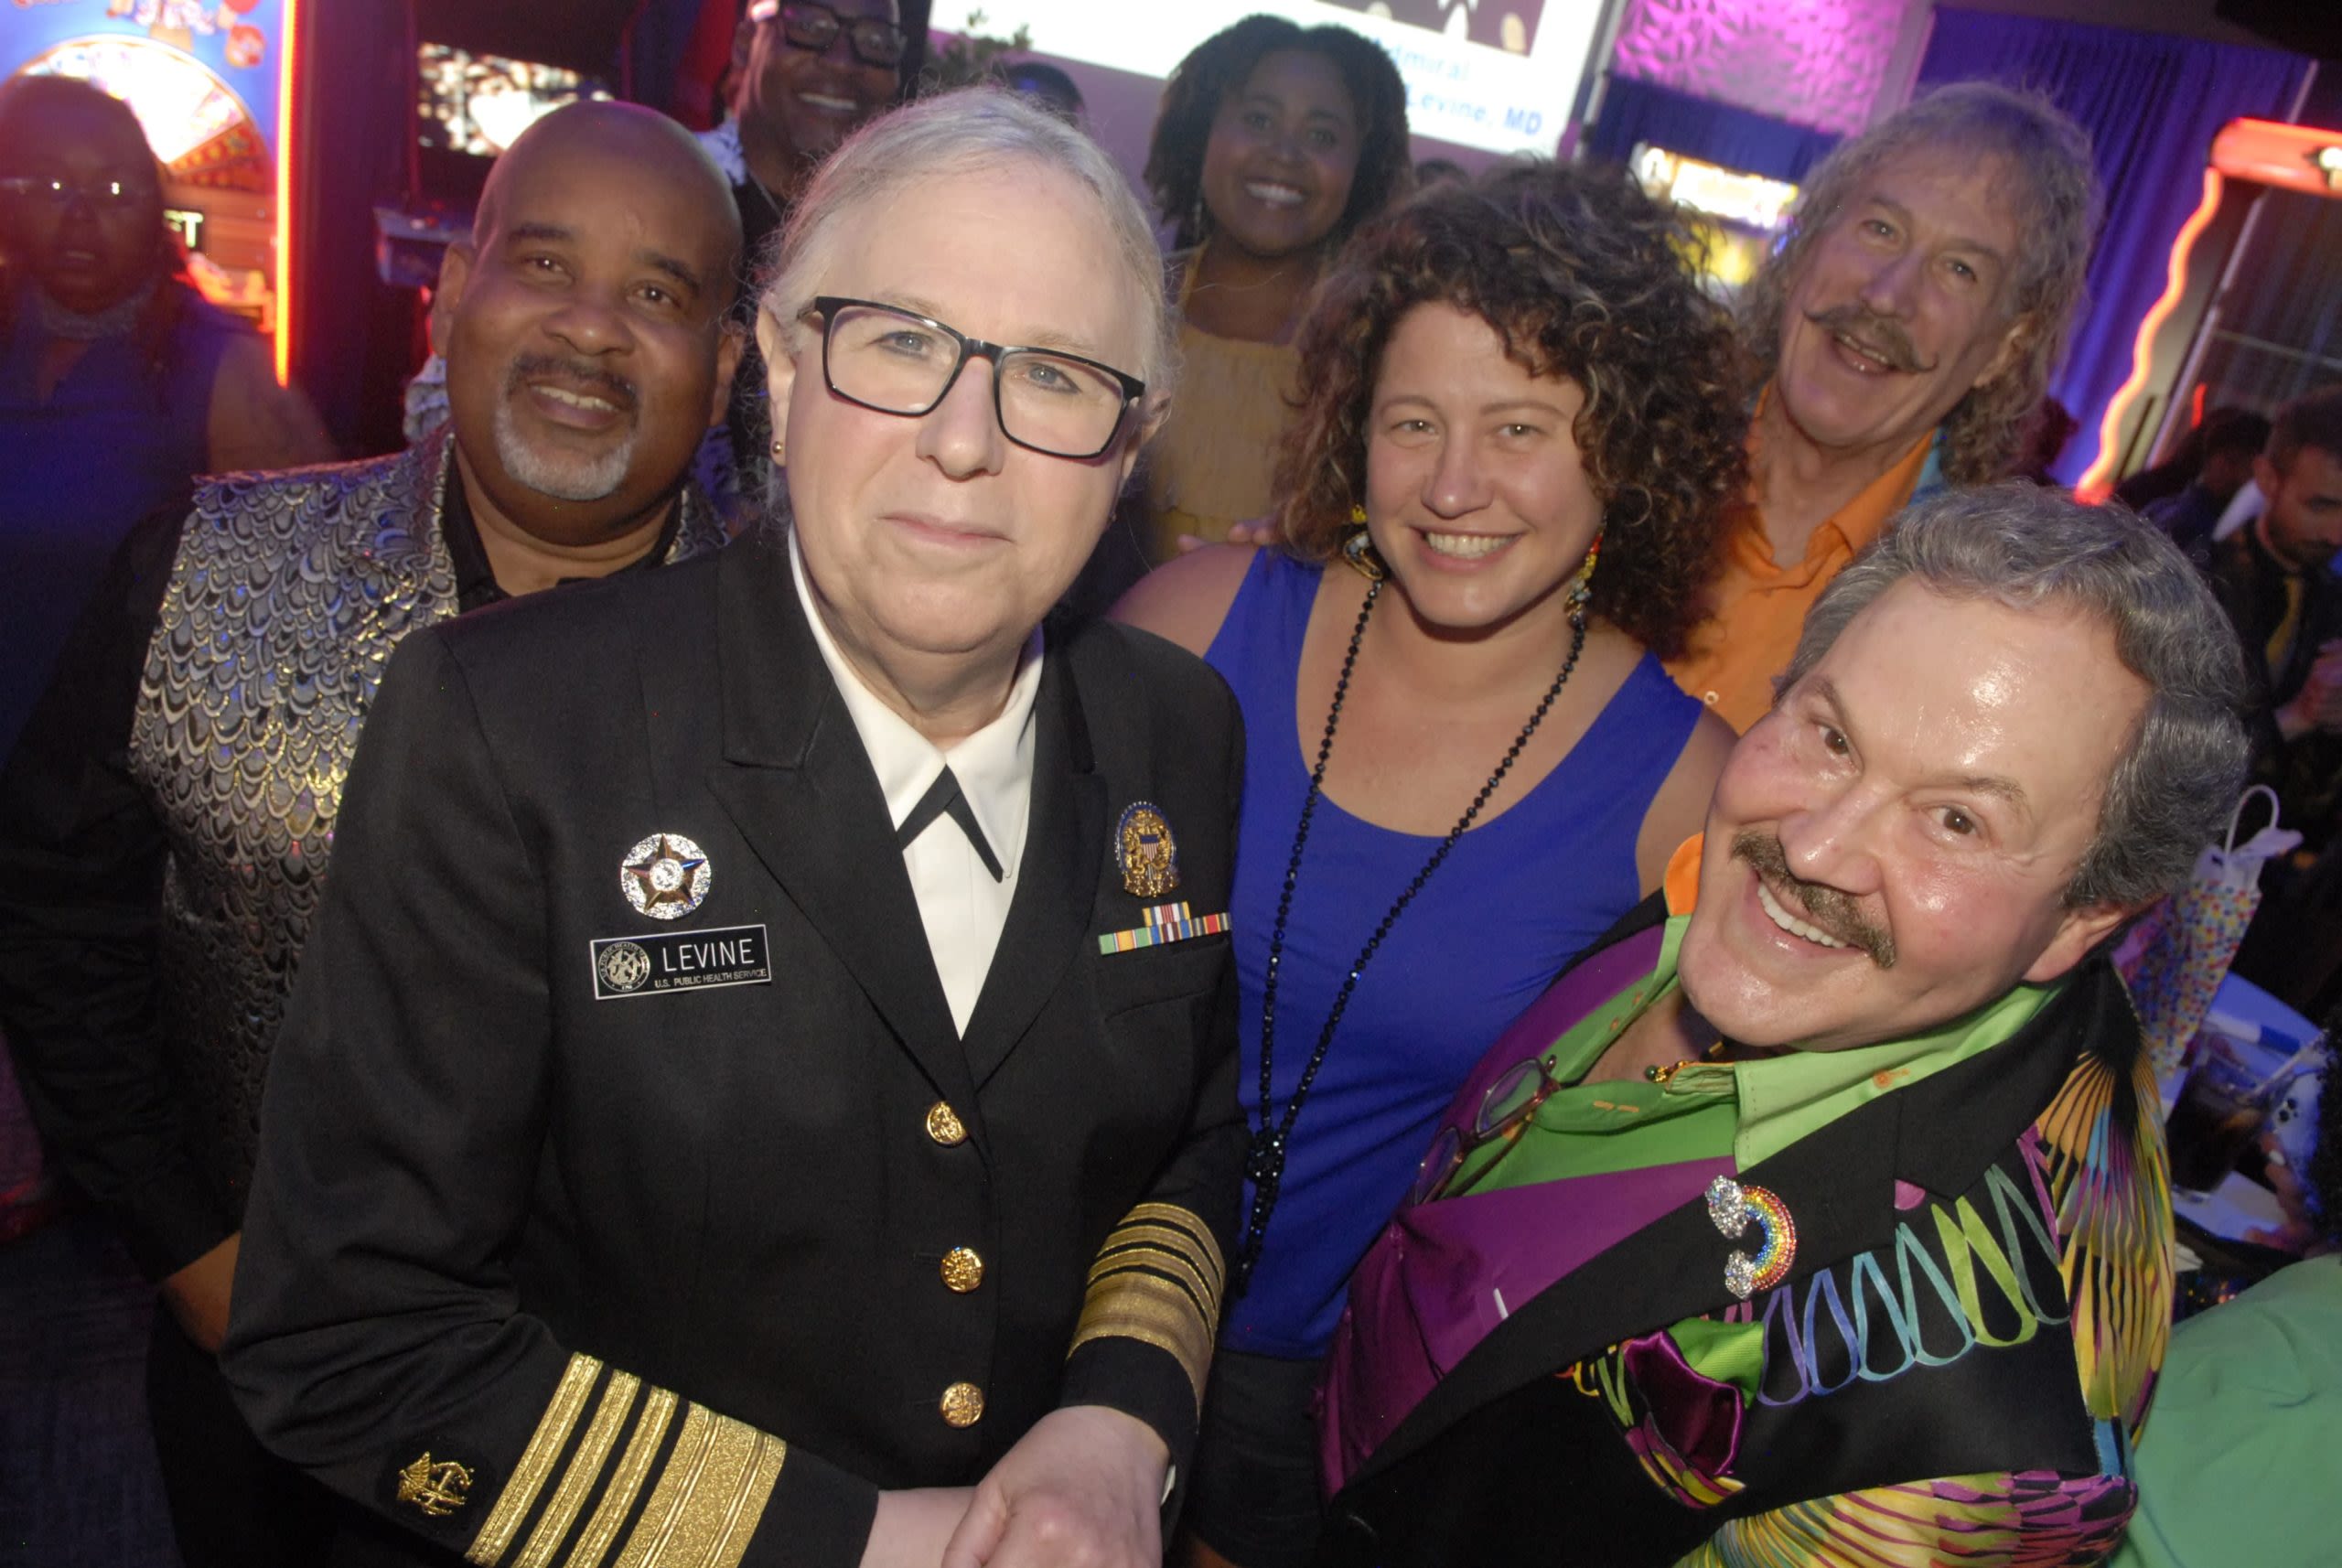 Capital Pride Honors to Take Place on Friday, May 31